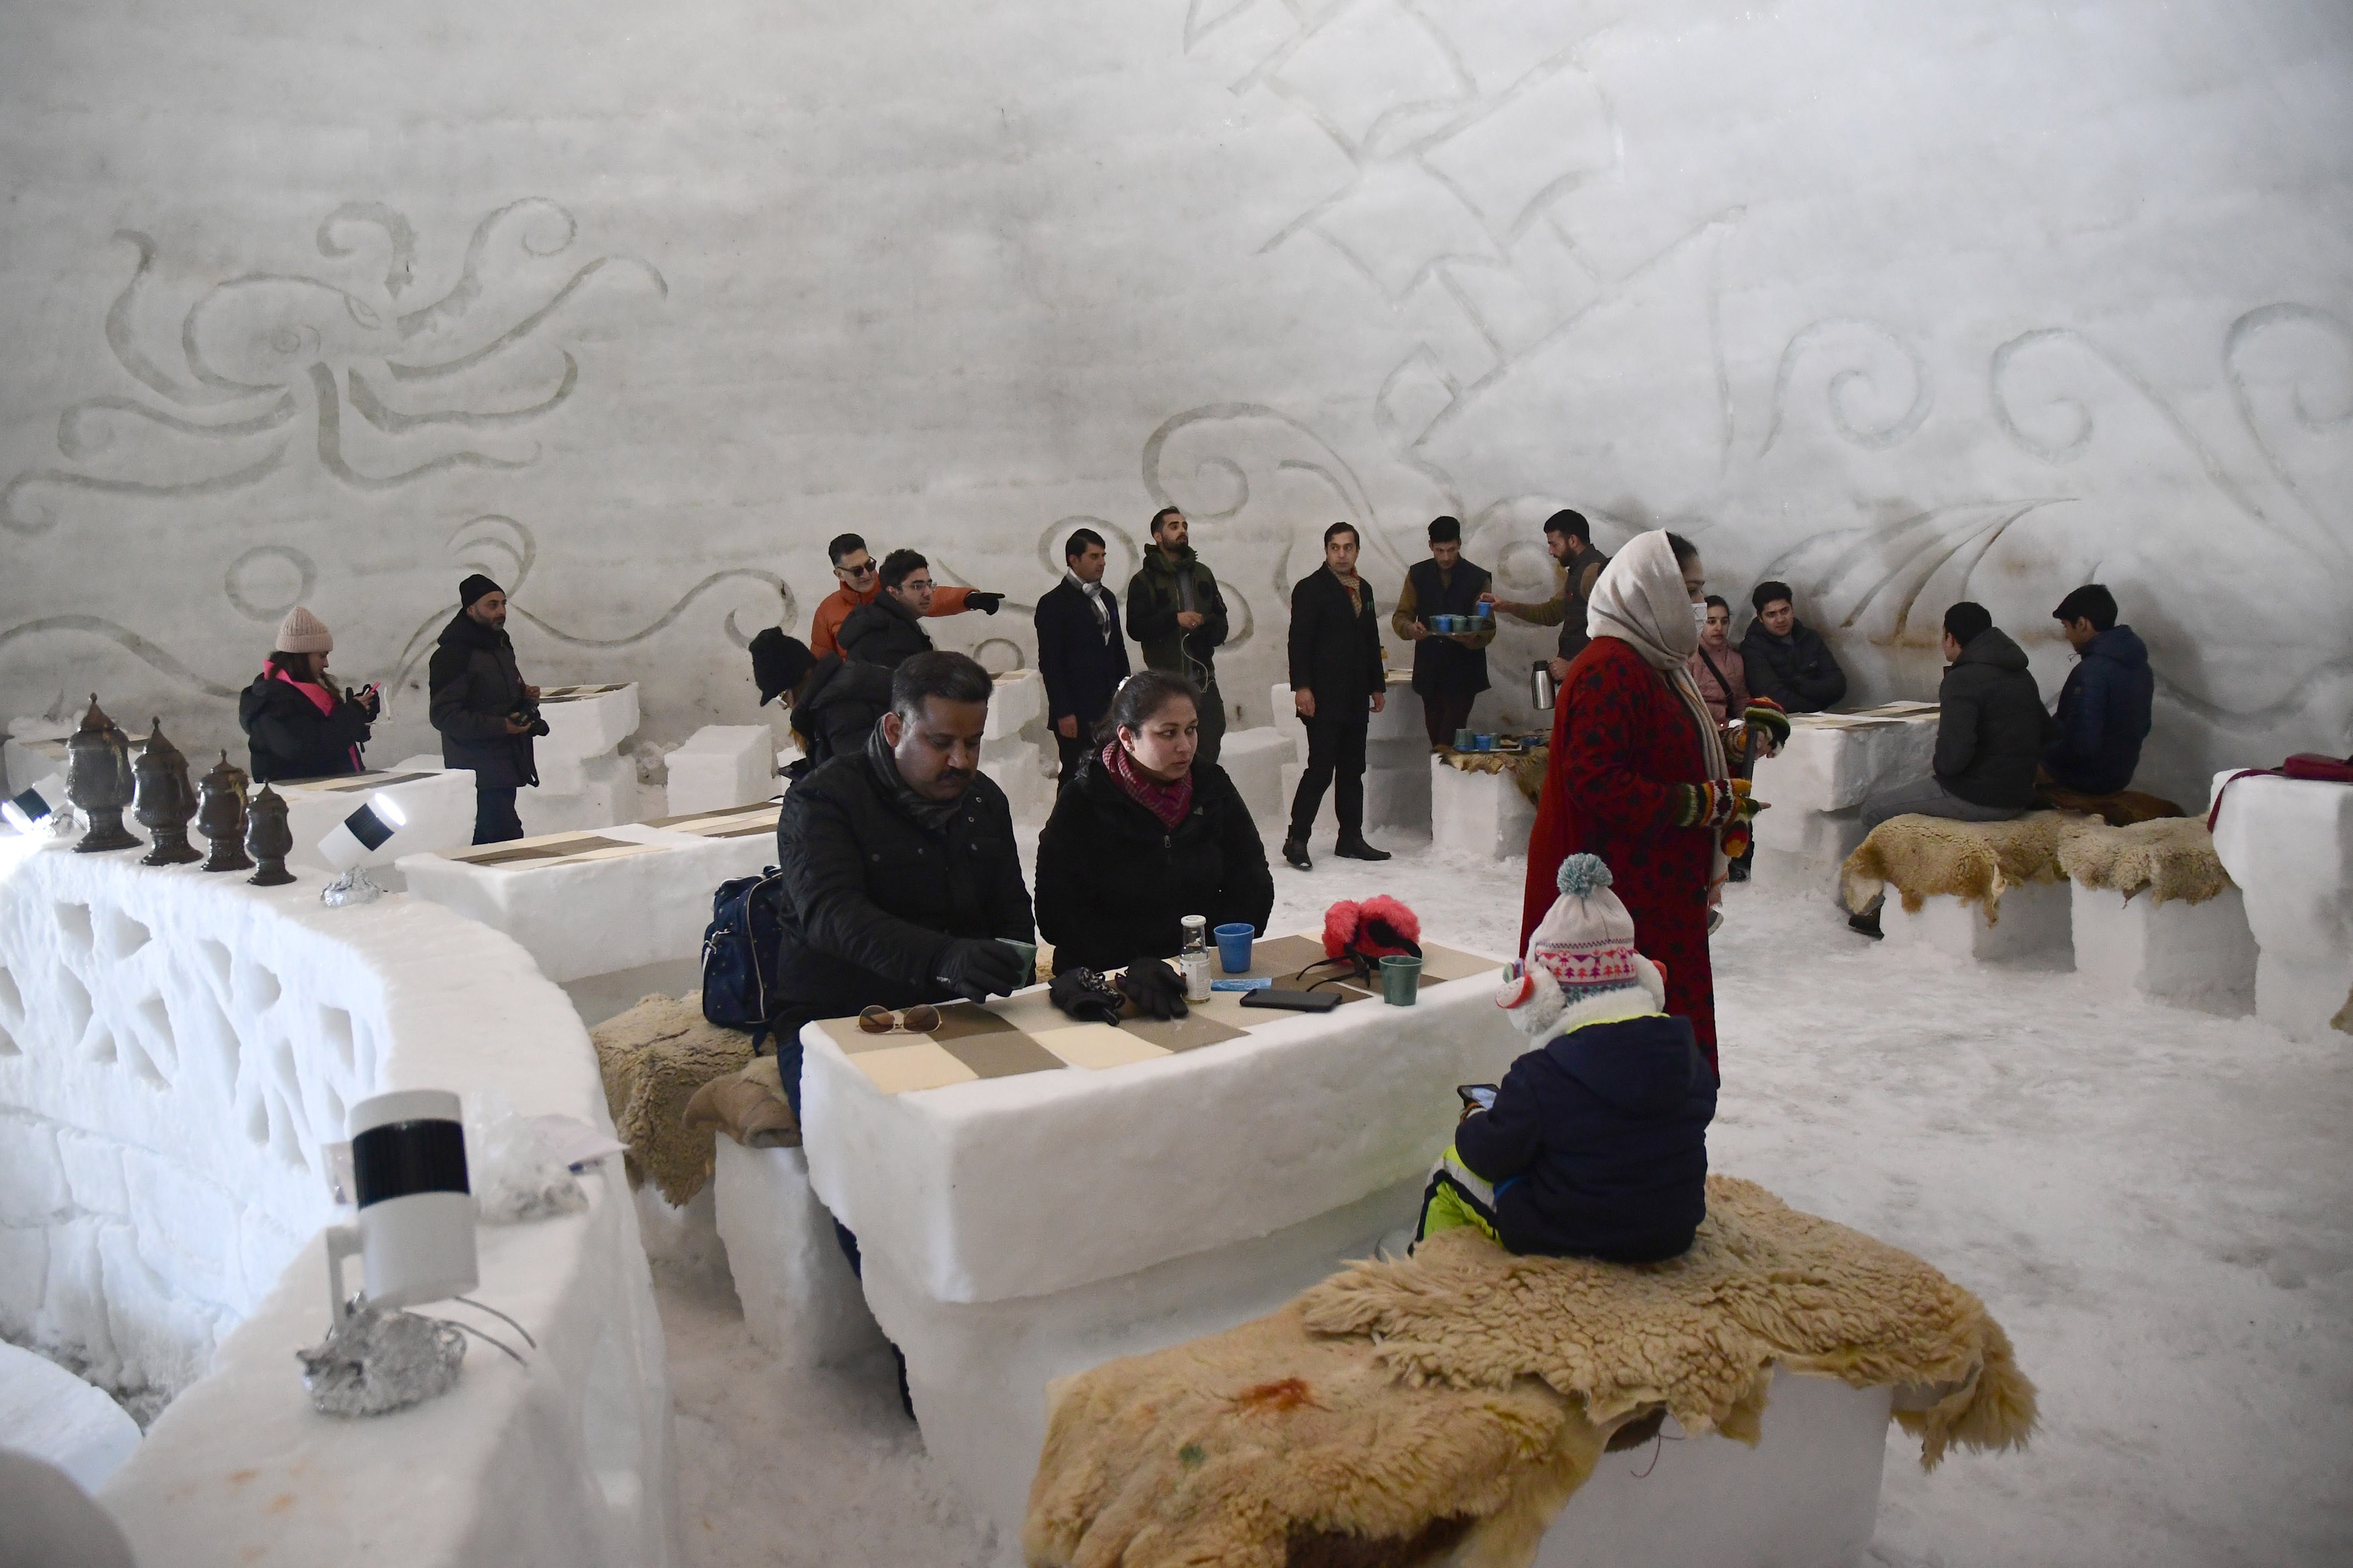 The staff of Kolahoi group said that this year's Igloo is much bigger than the one they had built last year